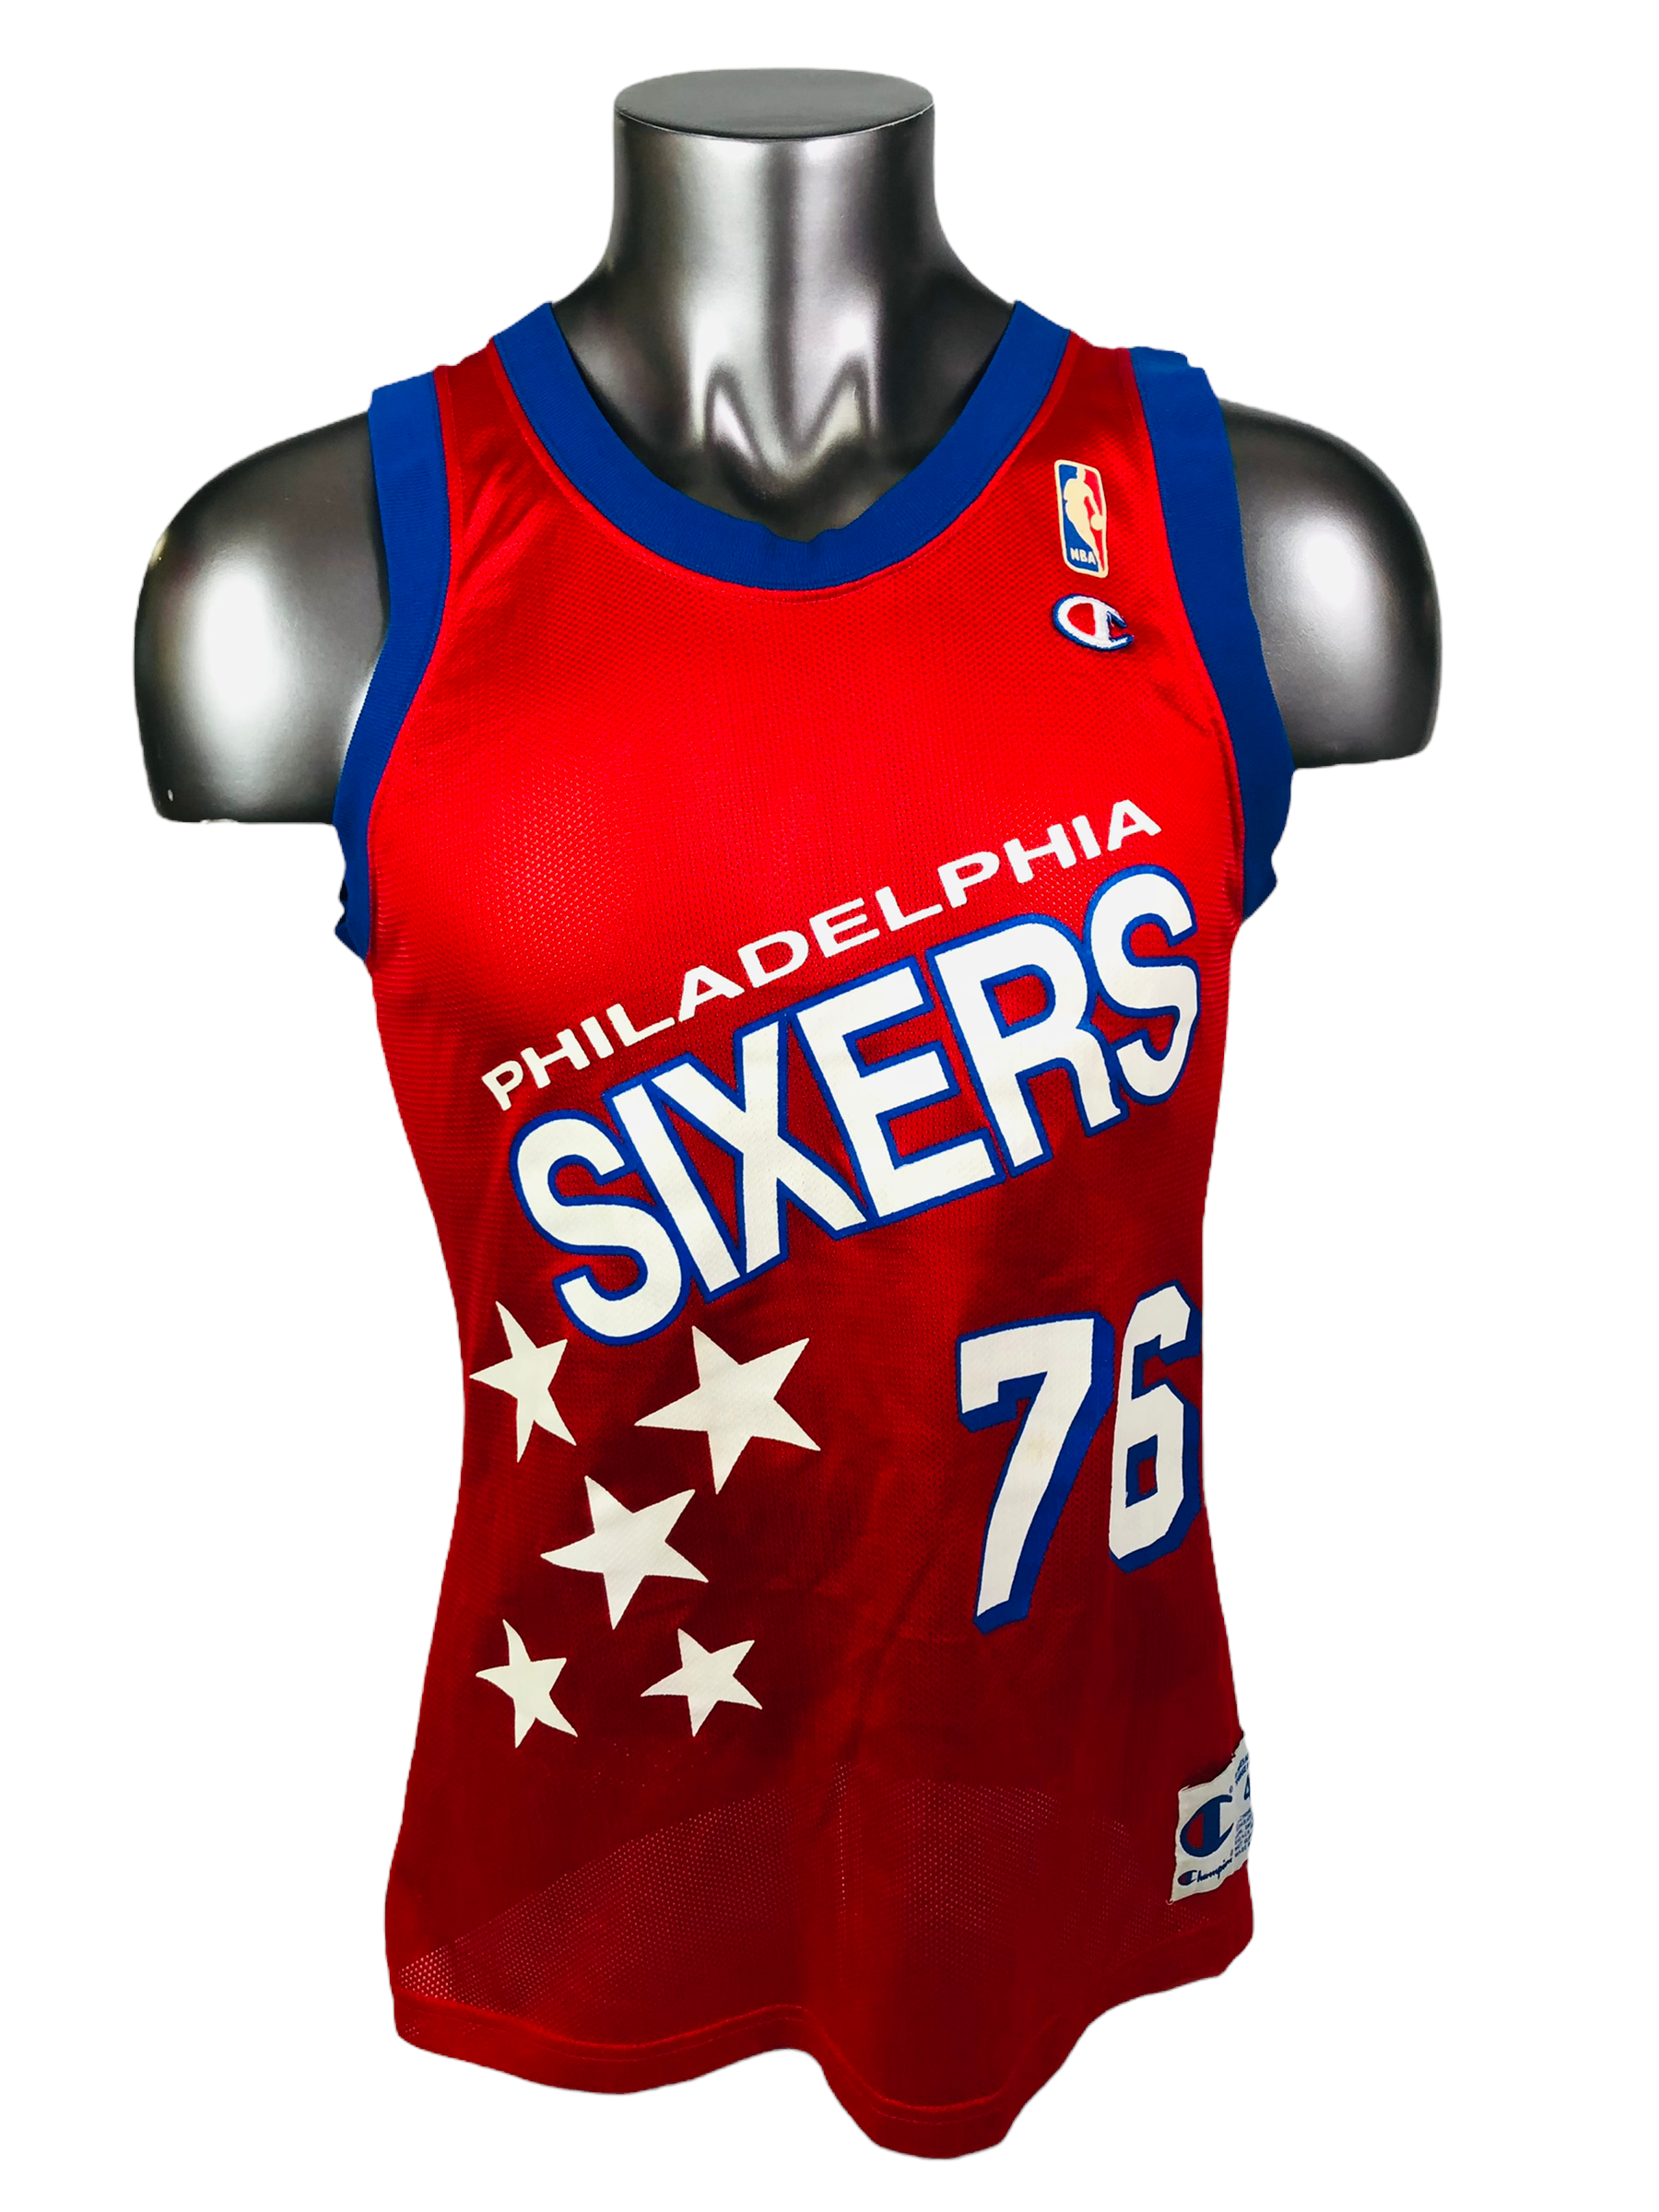 76 ers jersey